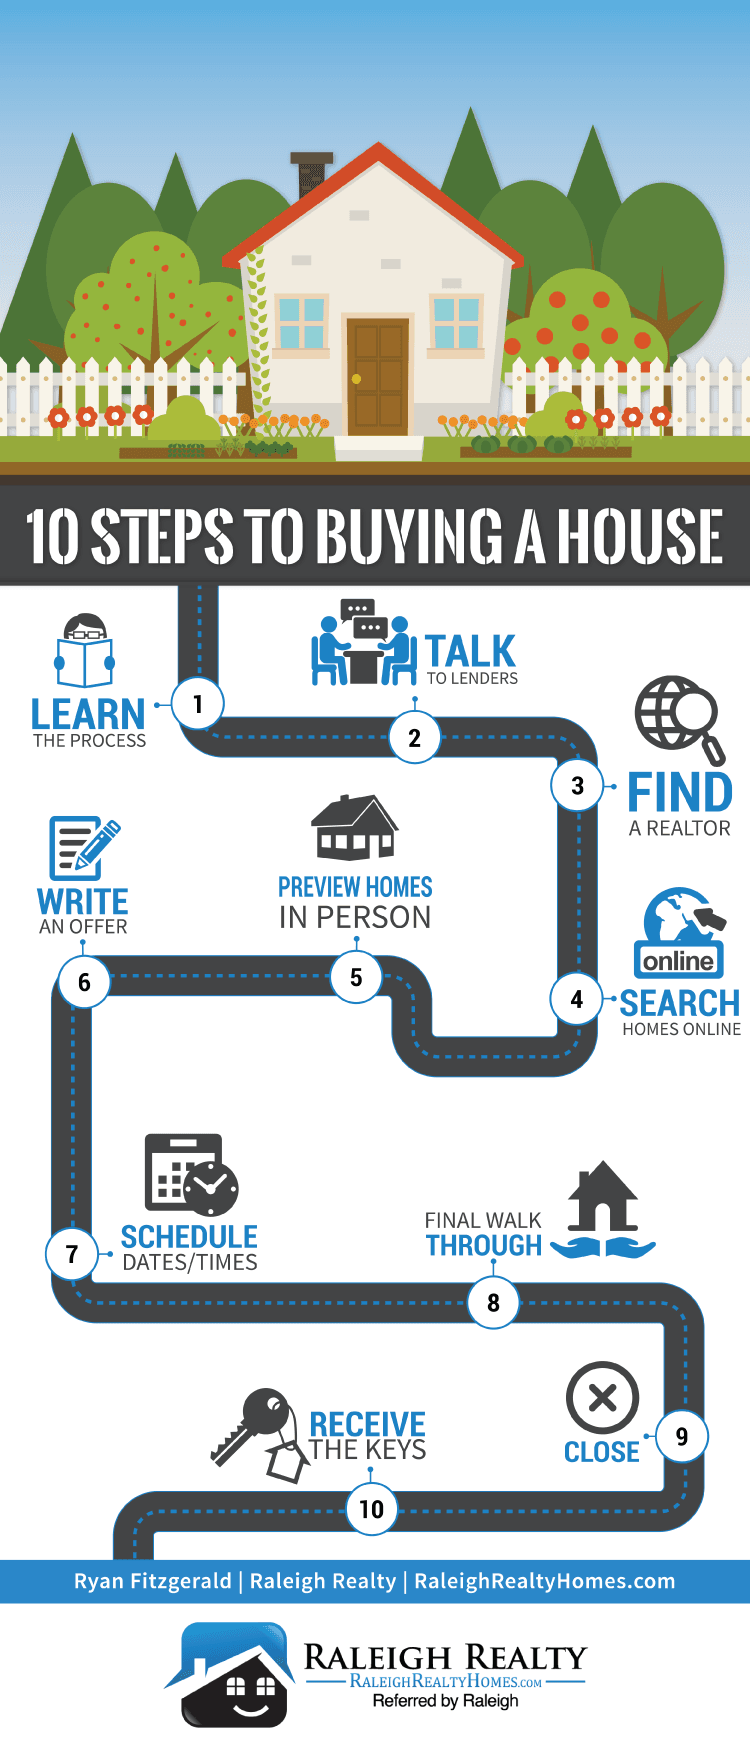 10 Steps to Buying a House in Raleigh, NC